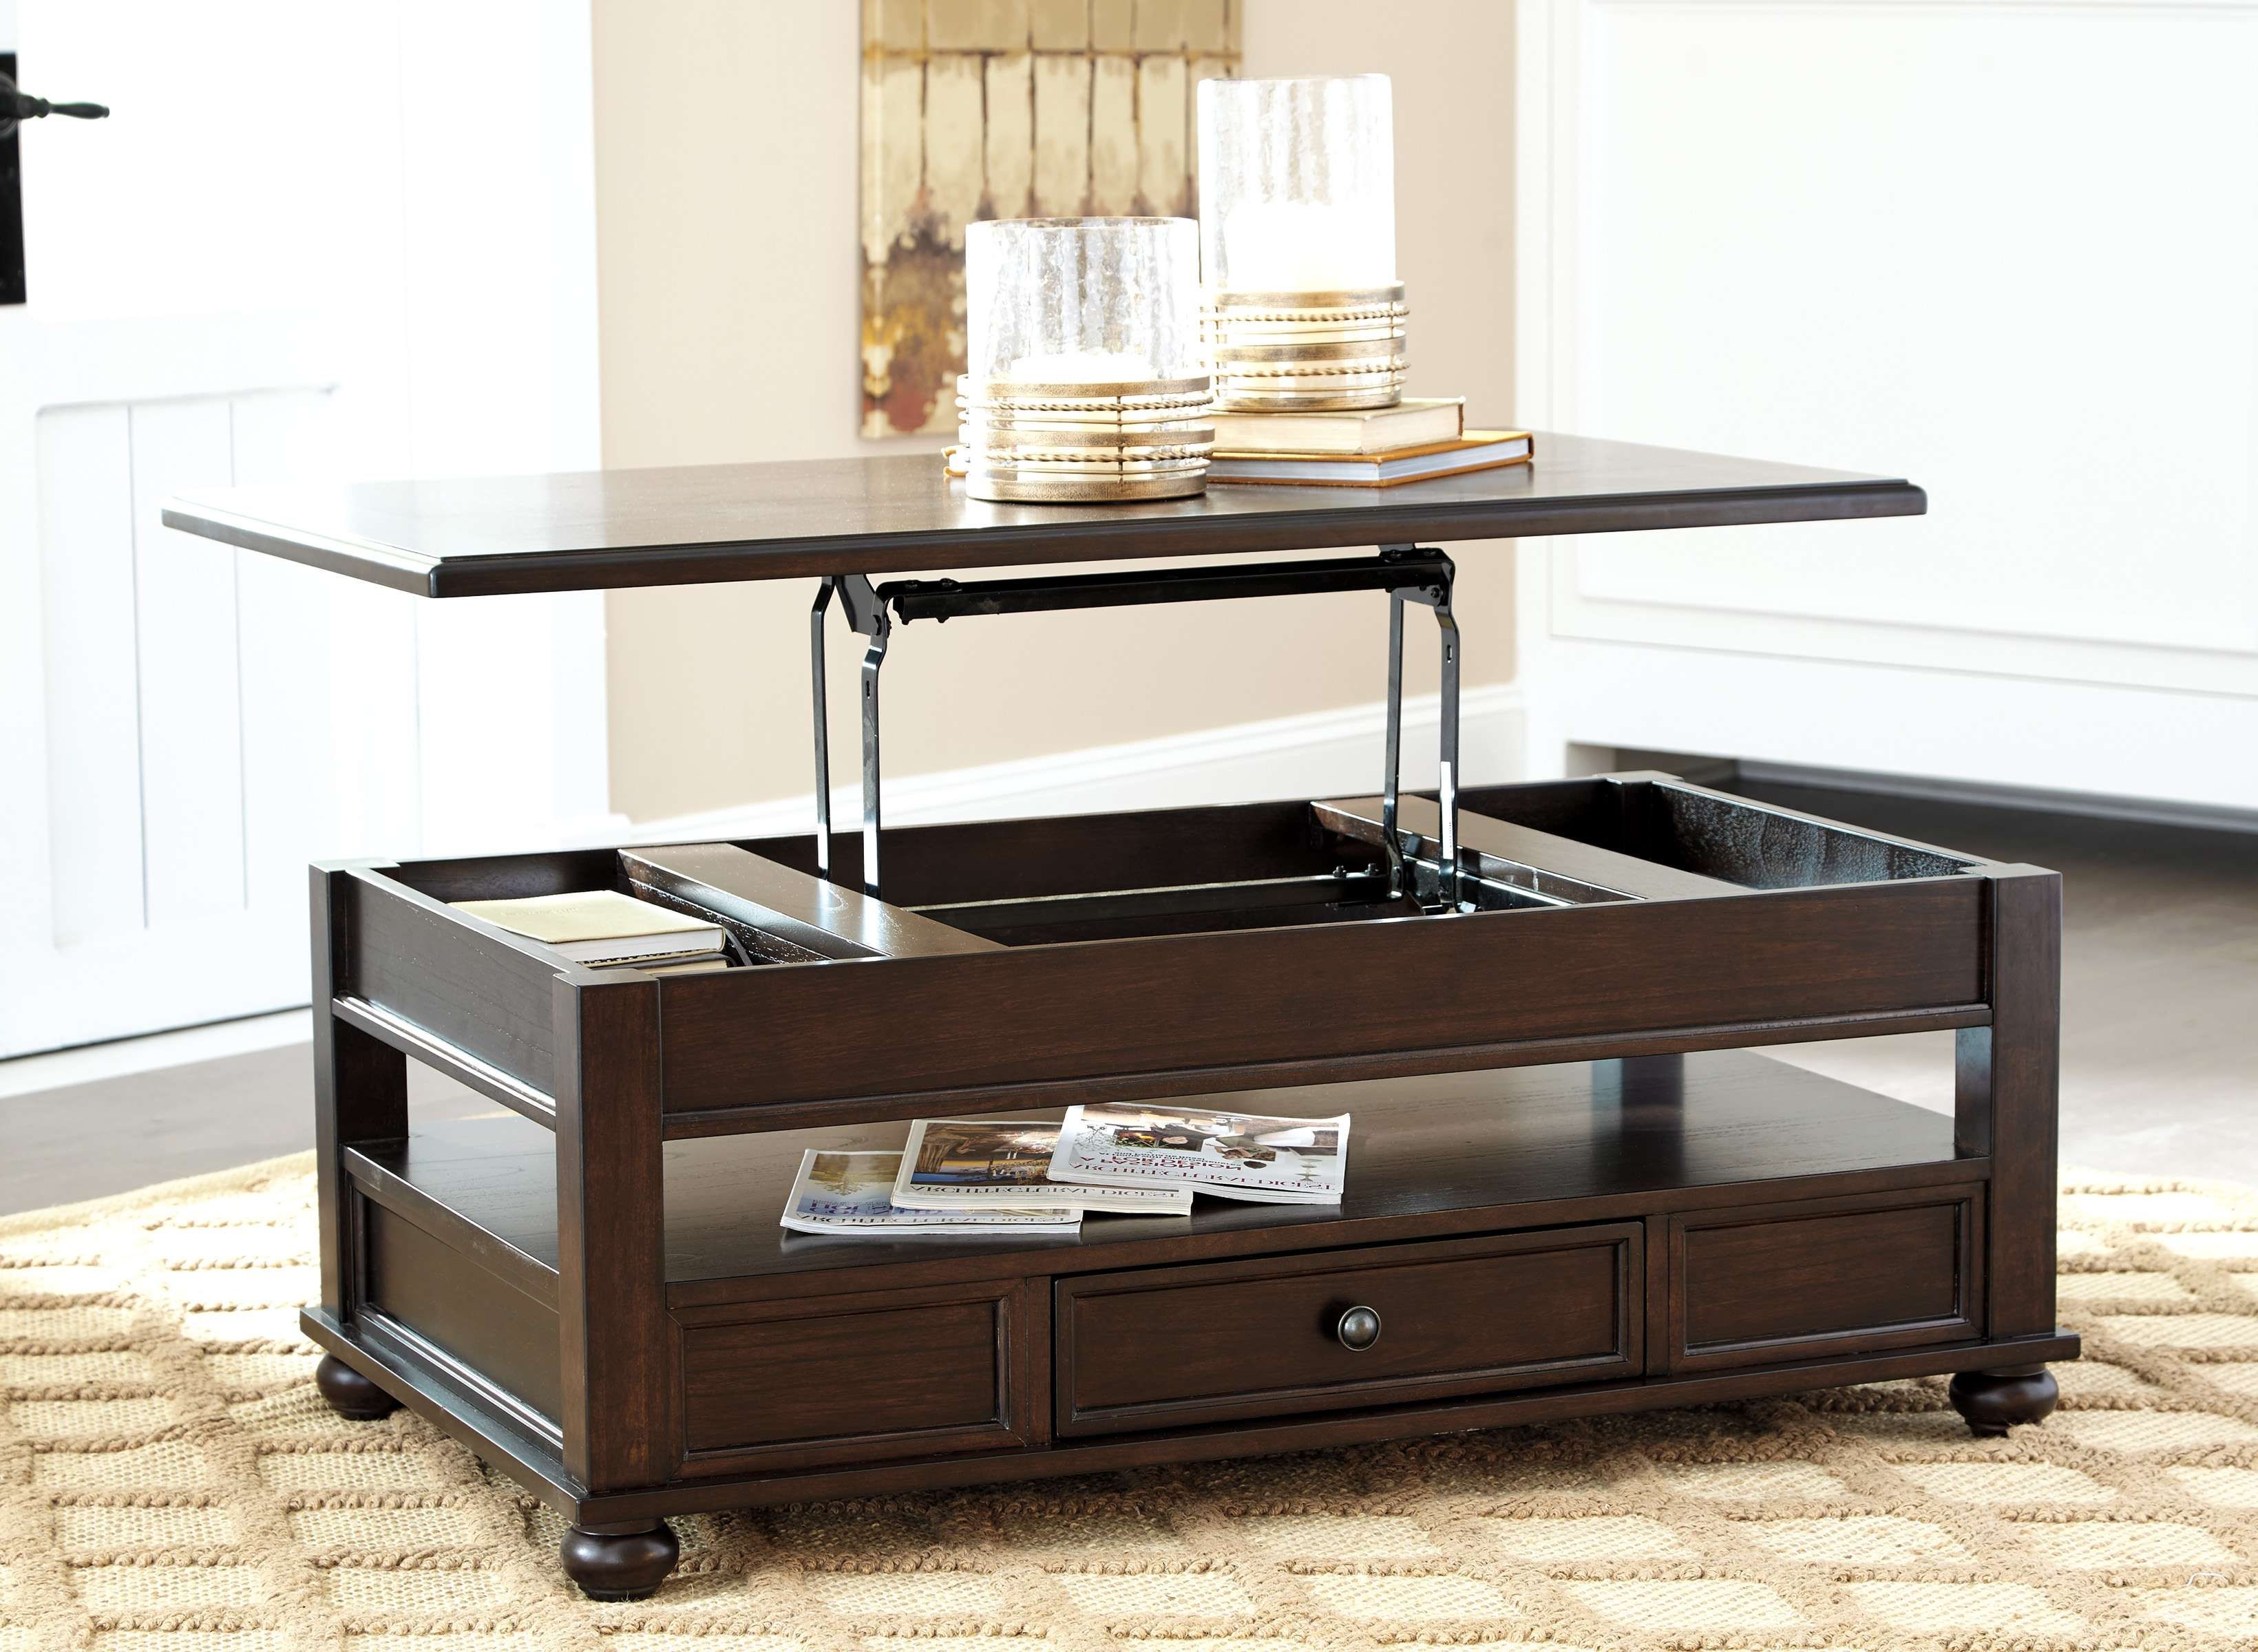 Coffee Tables : Square Lift Top Table Small Coffee Carlyle With With Regard To Most Recent Raise Up Coffee Tables (Gallery 18 of 20)